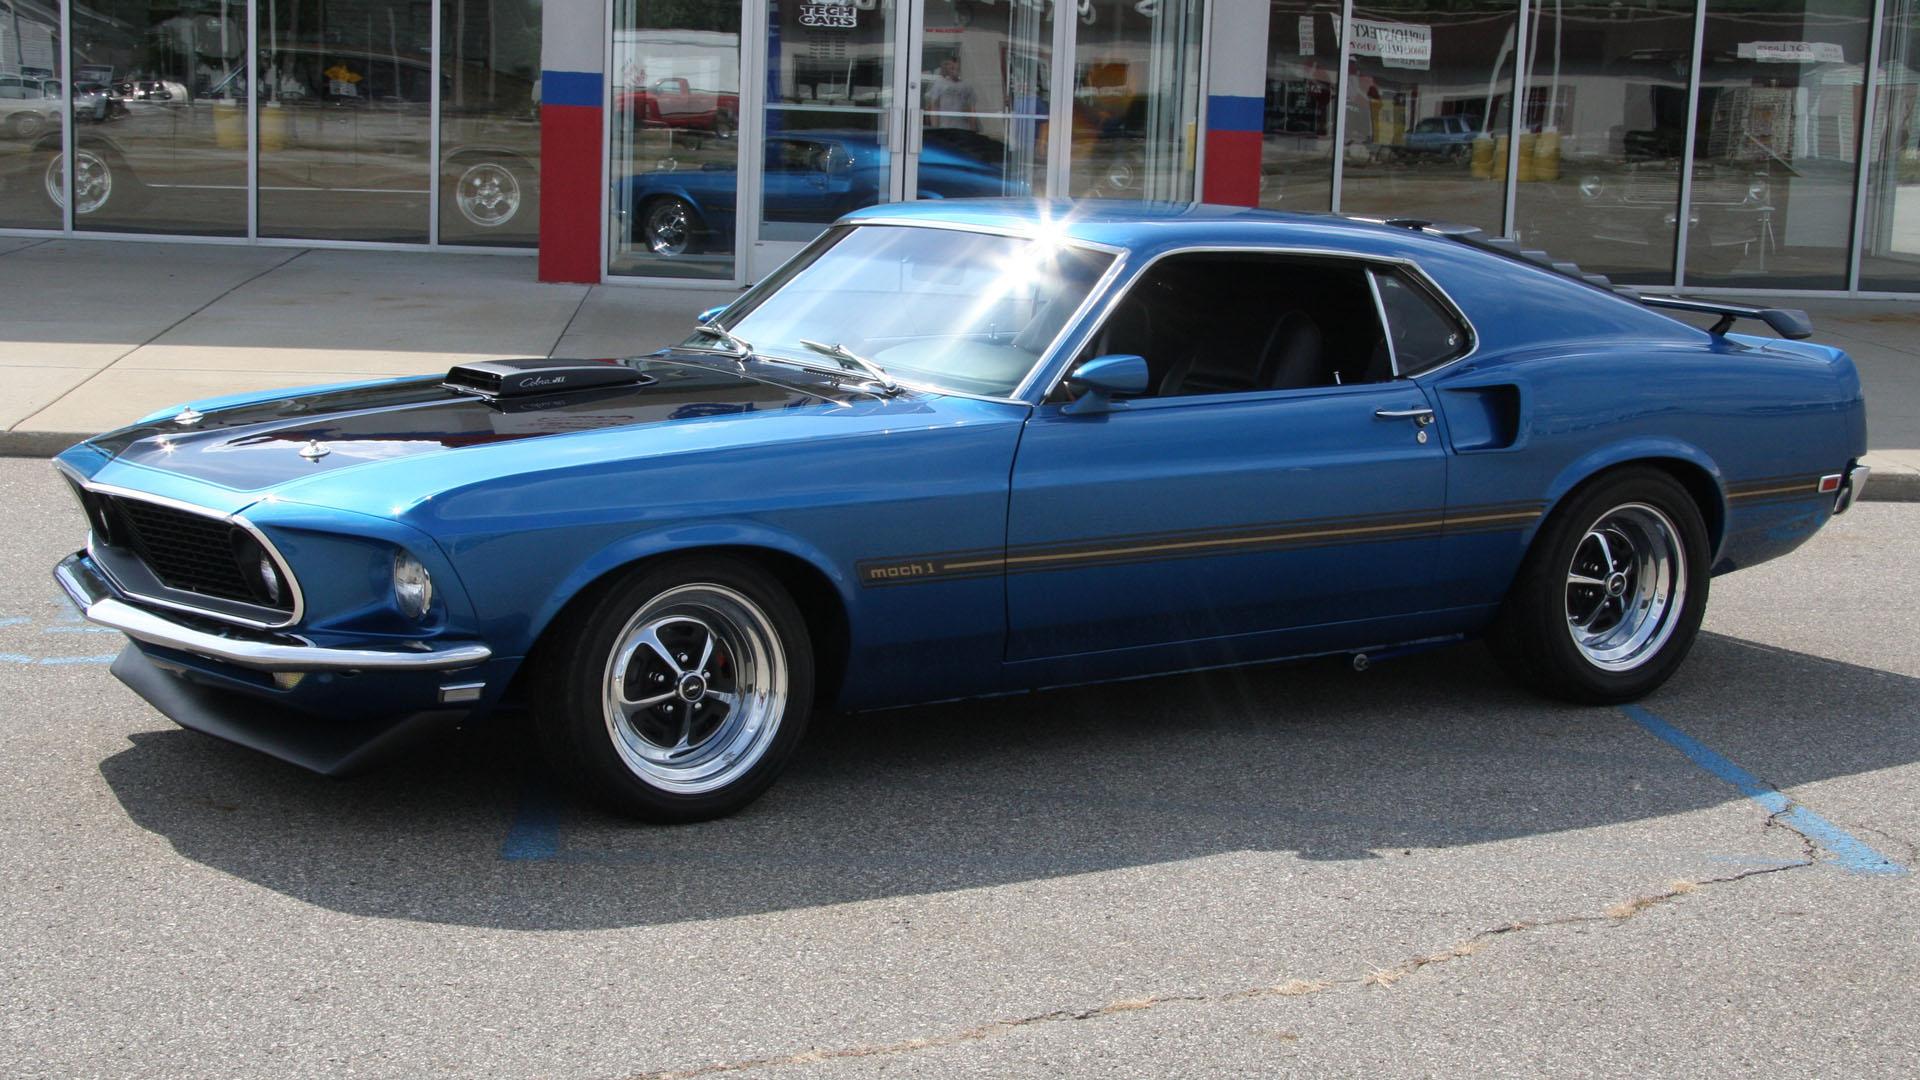 reflections, cars, Ford Mustang, vehicles, Ford Mustang Mach 1